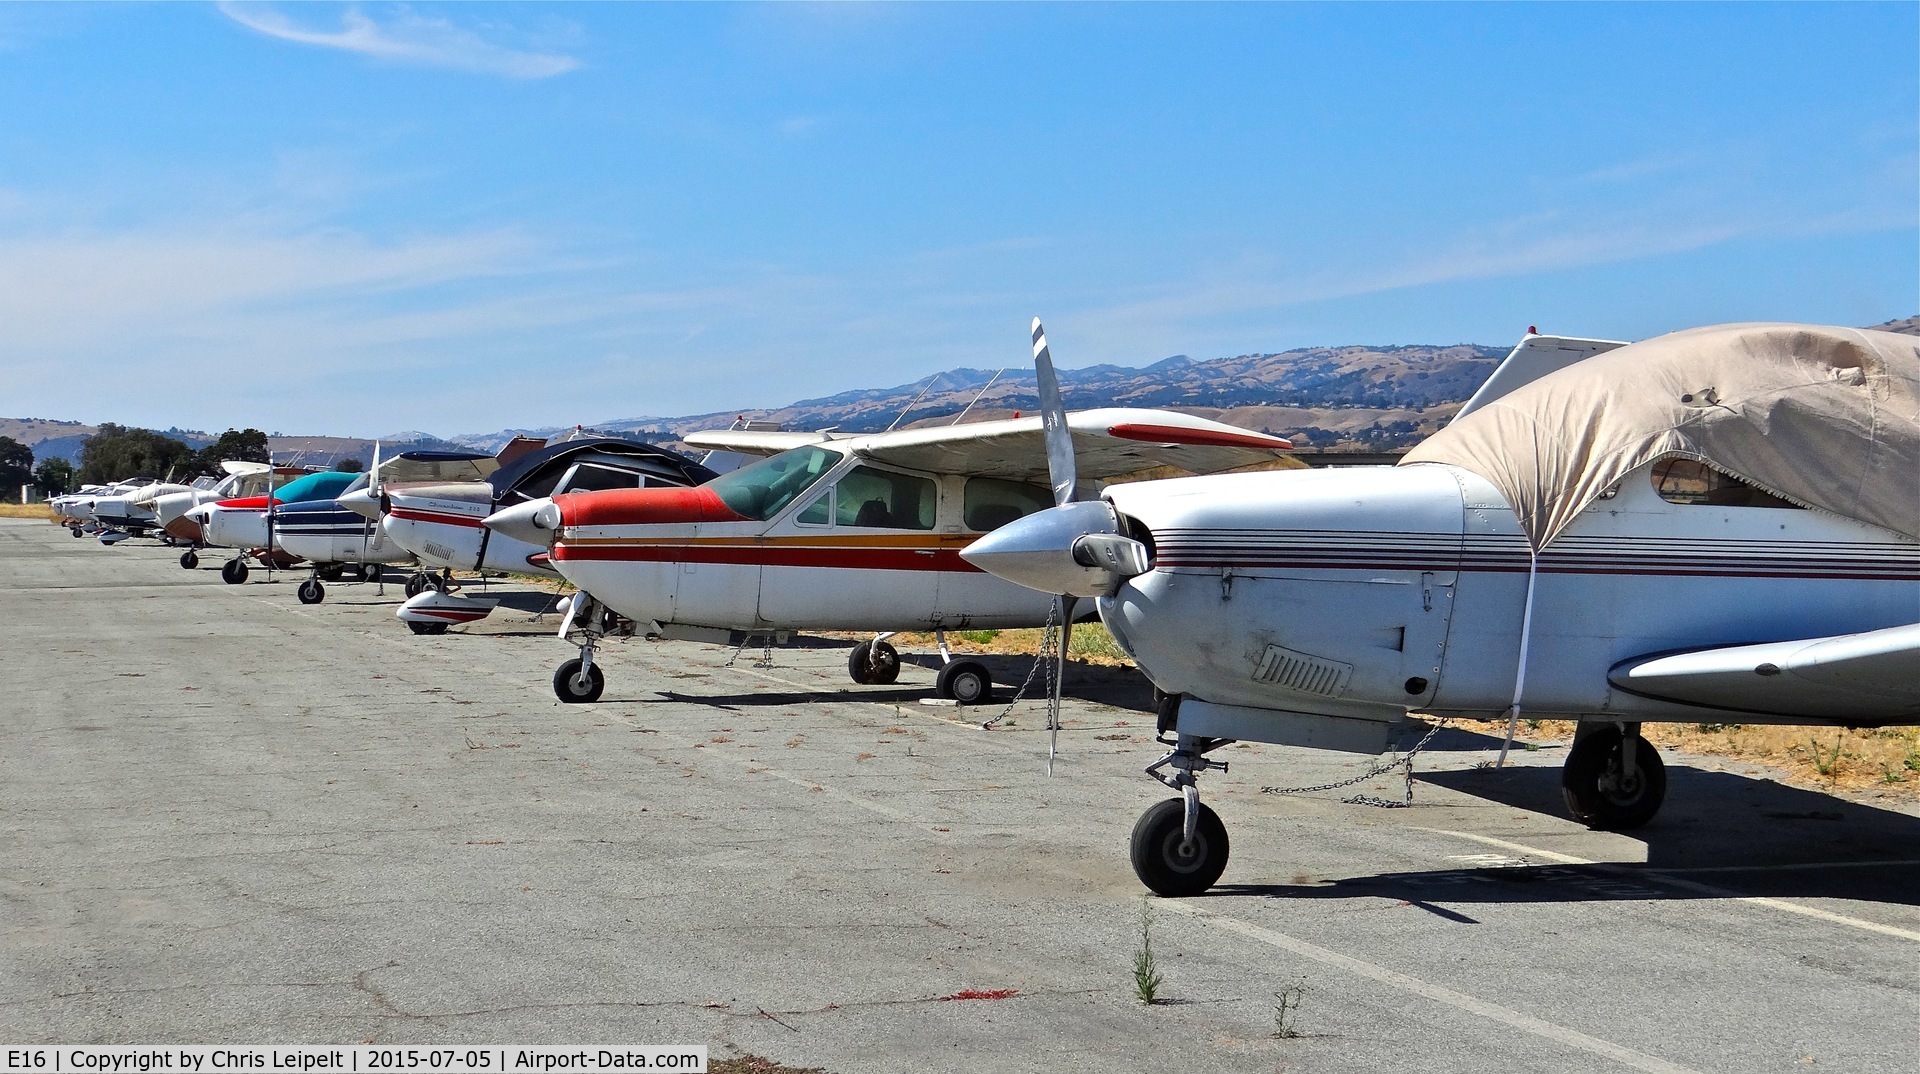 South County Arpt Of Santa Clara County Airport (E16) - Long line of locally-based single engine pistons at South County Airport, San Martin, CA. Most of these aircraft are non airworthiness.